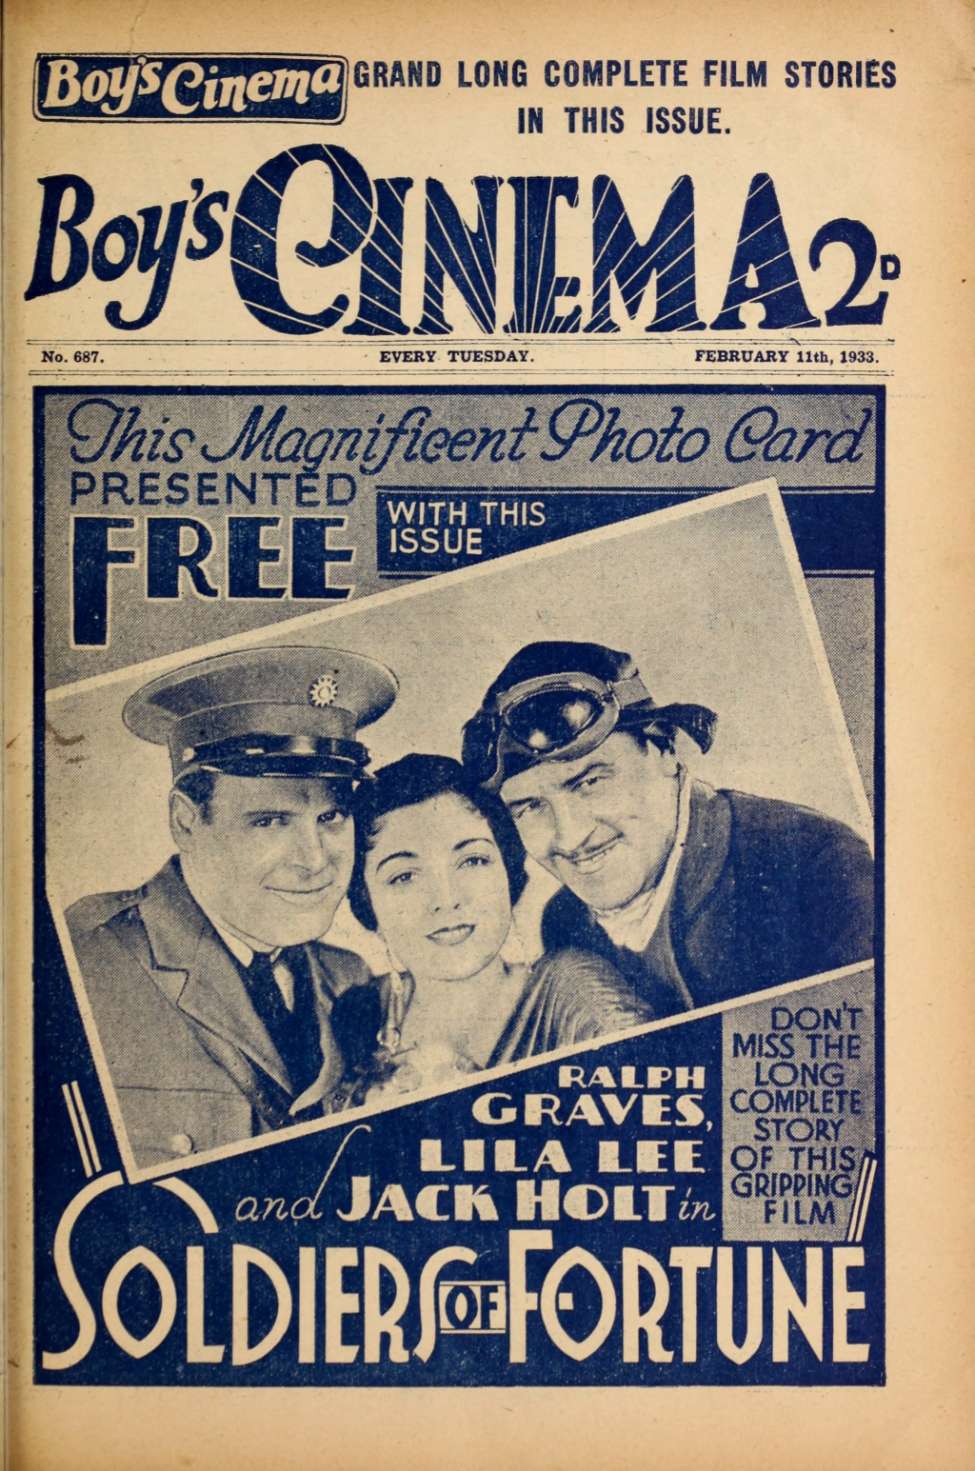 Comic Book Cover For Boy's Cinema 687 - Soldiers of Fortune - Jack Holt